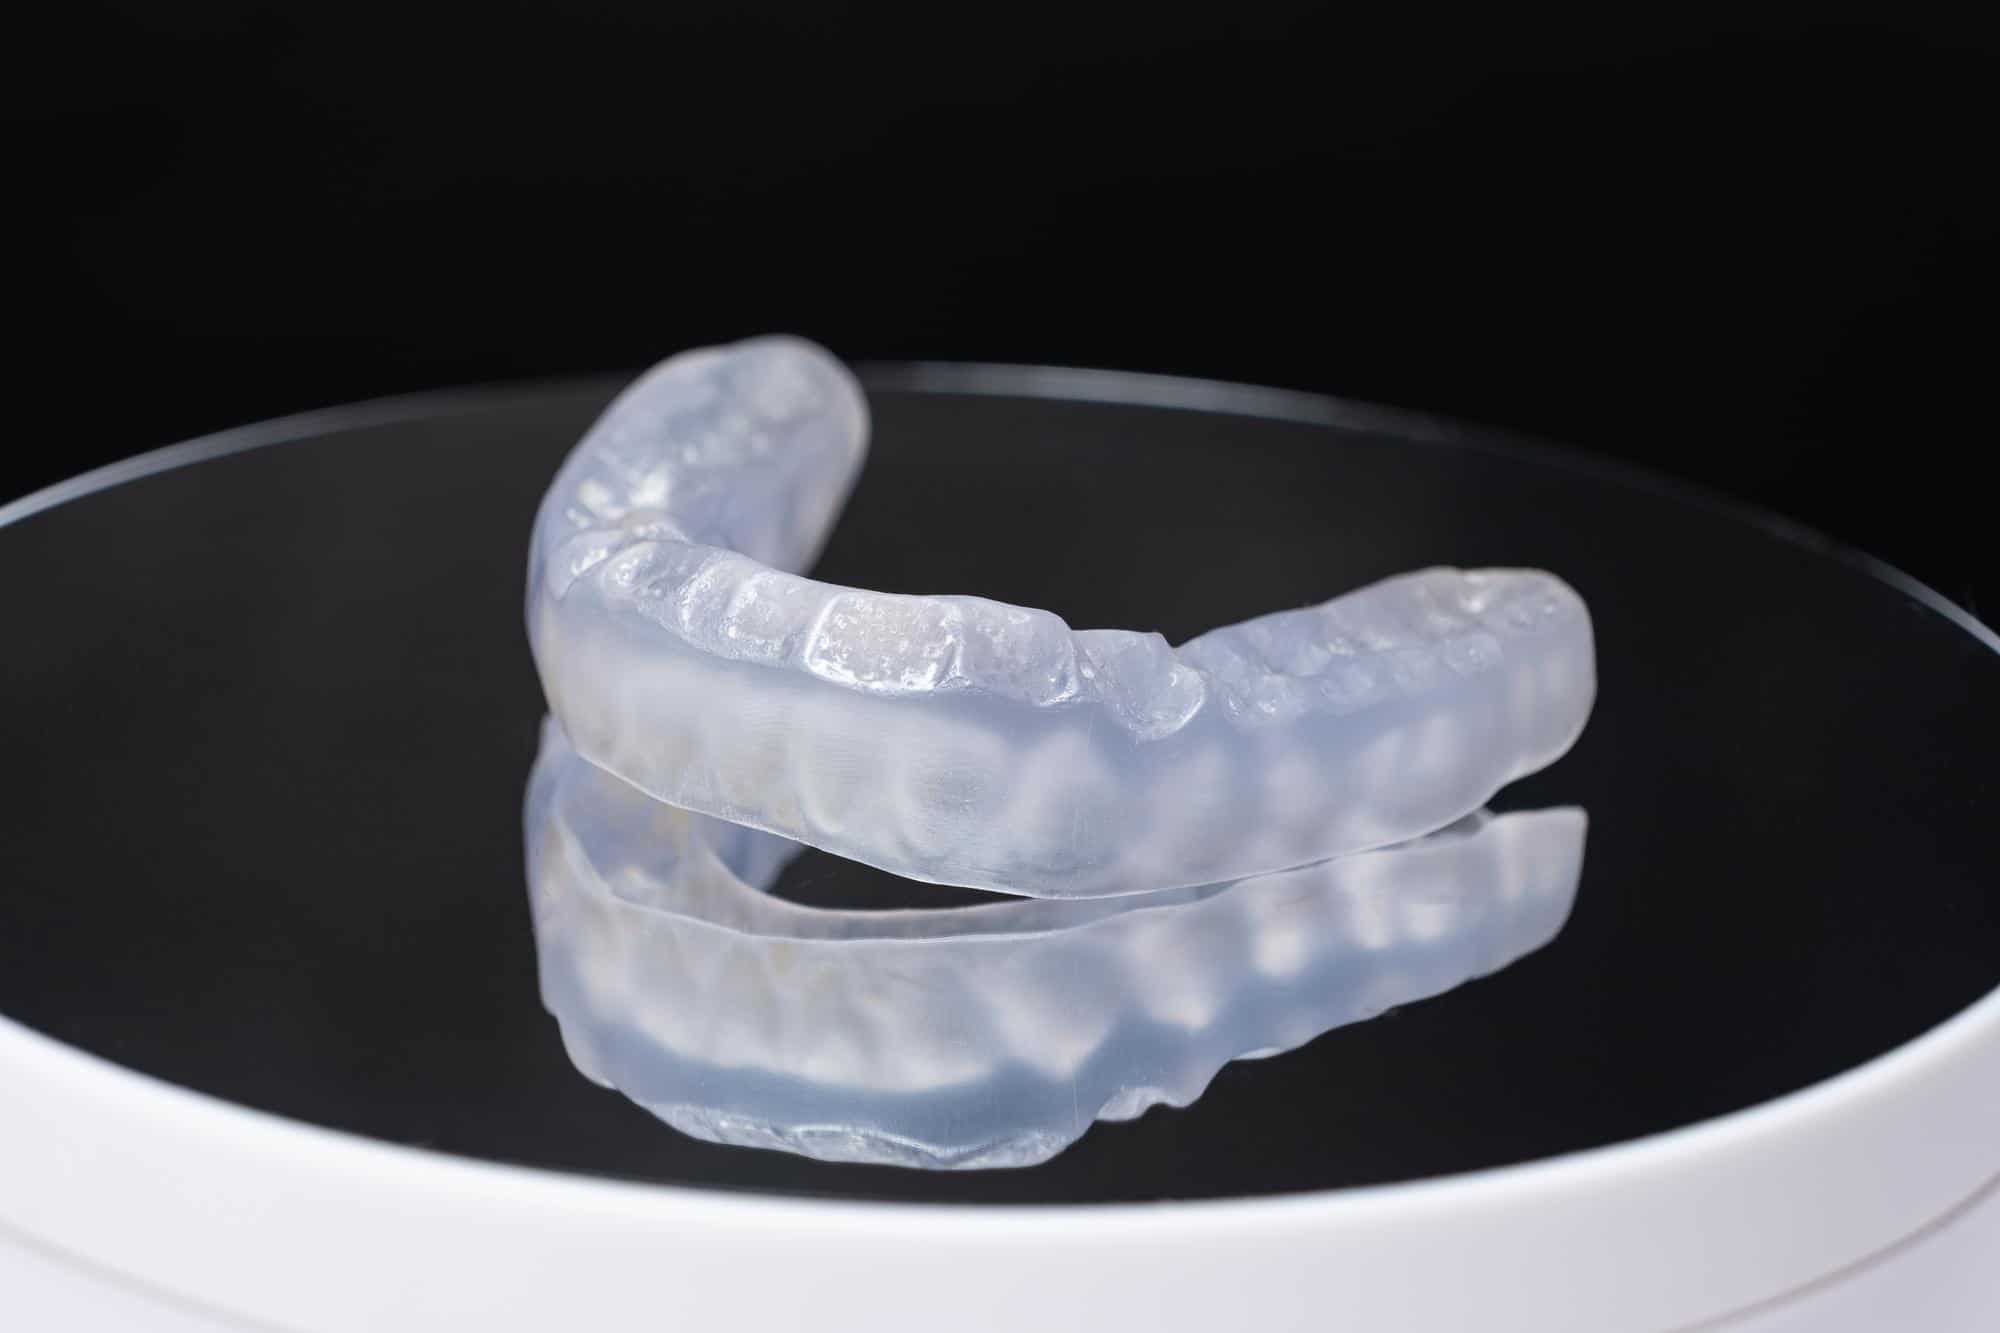 Mouth Guard : What do I need to Know?